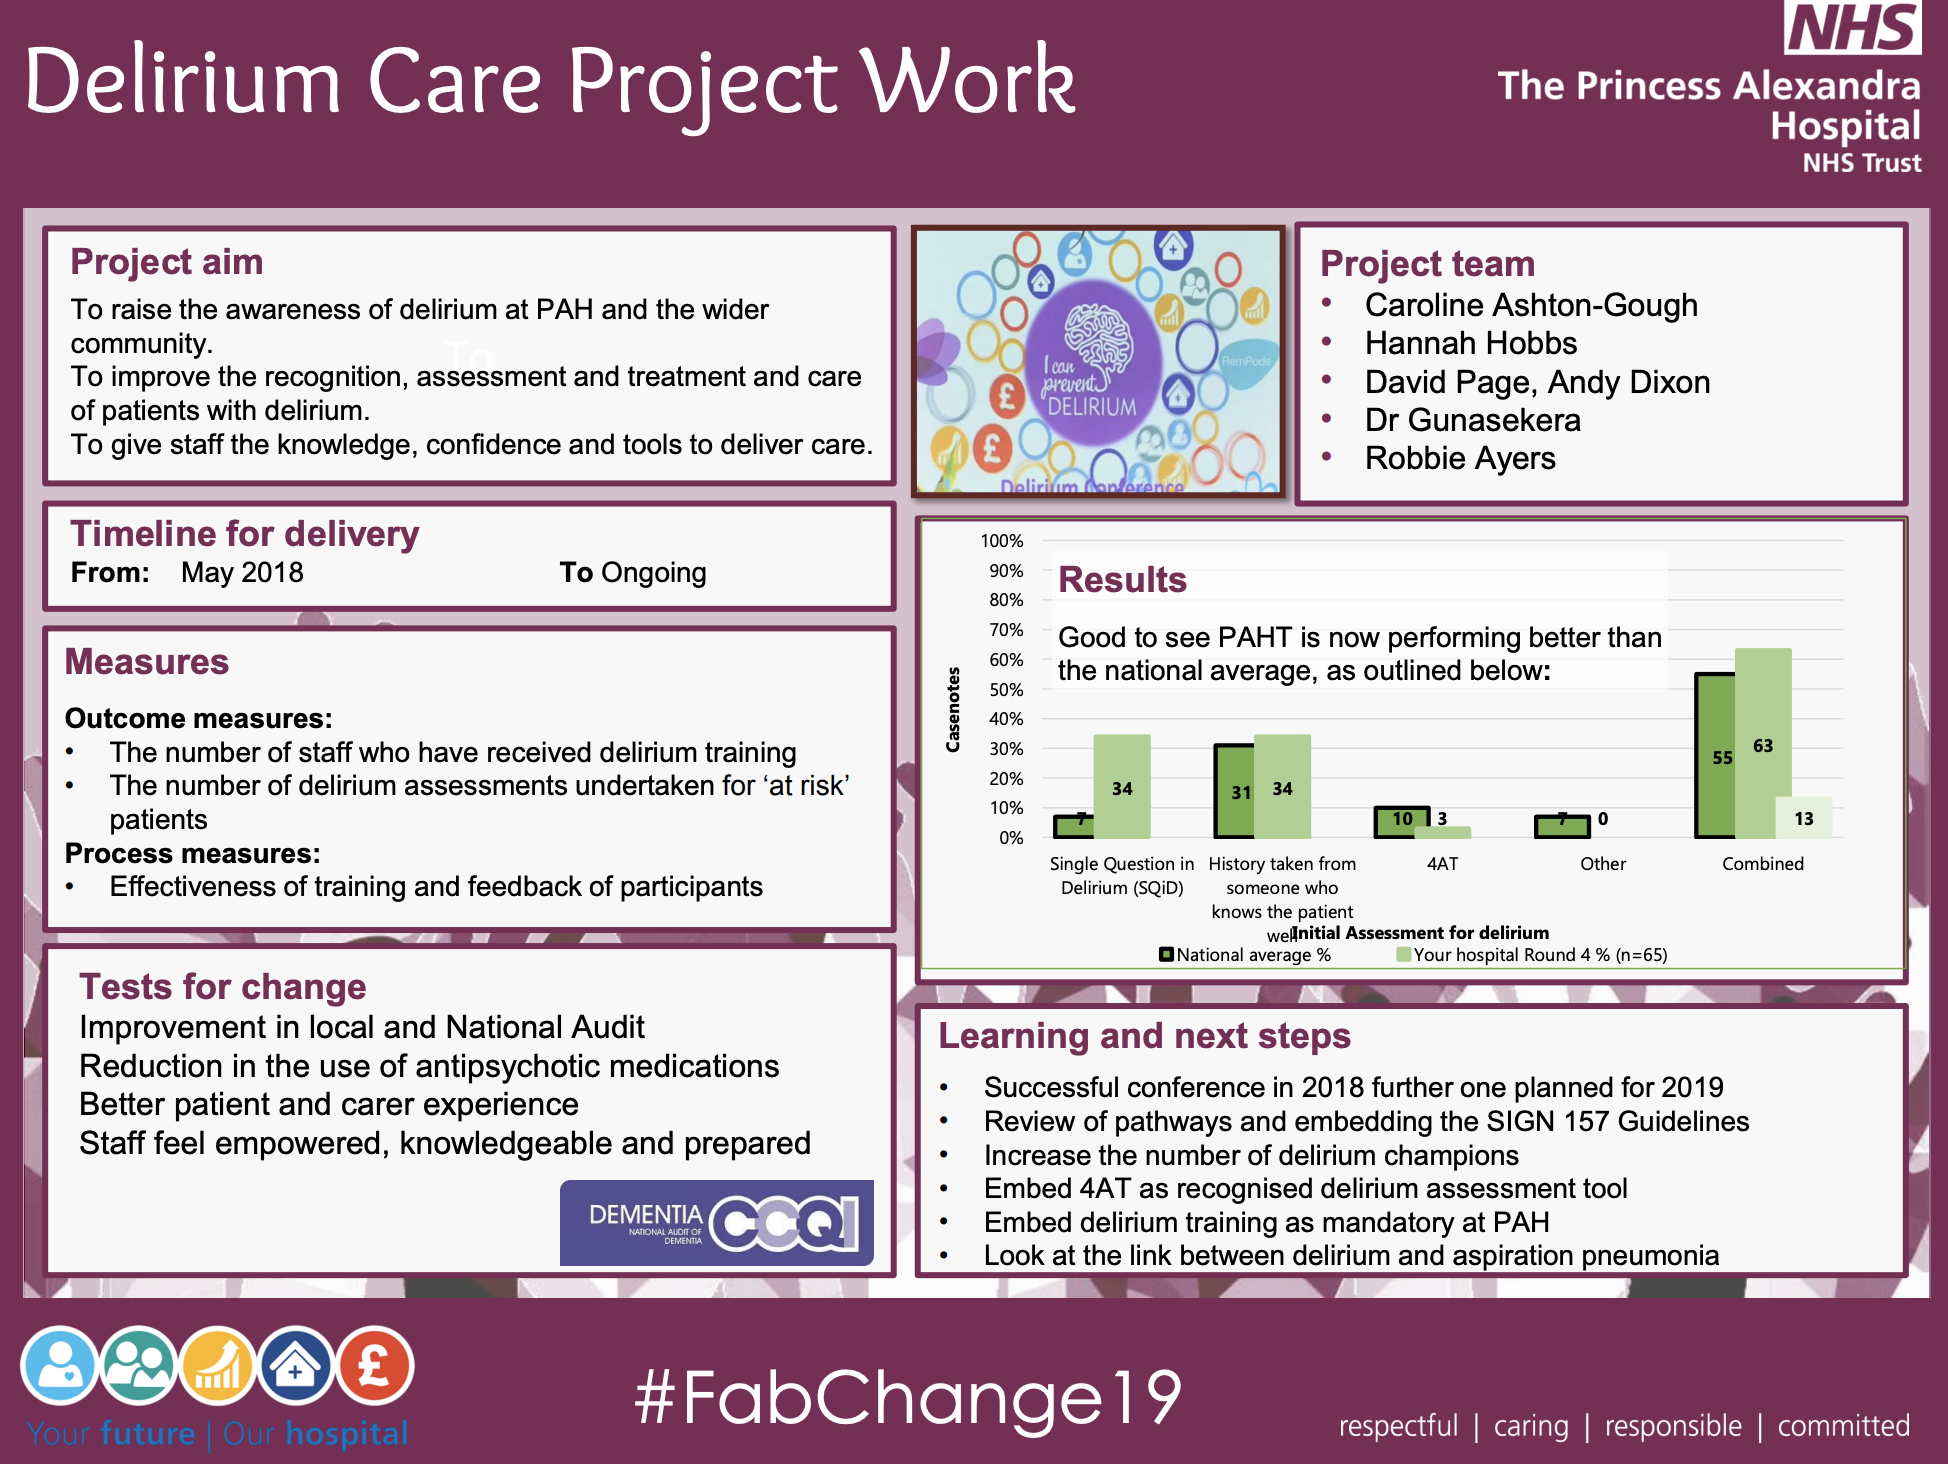 PAHT - Delirium Care Project Work - @QualityFirstPAH featured image